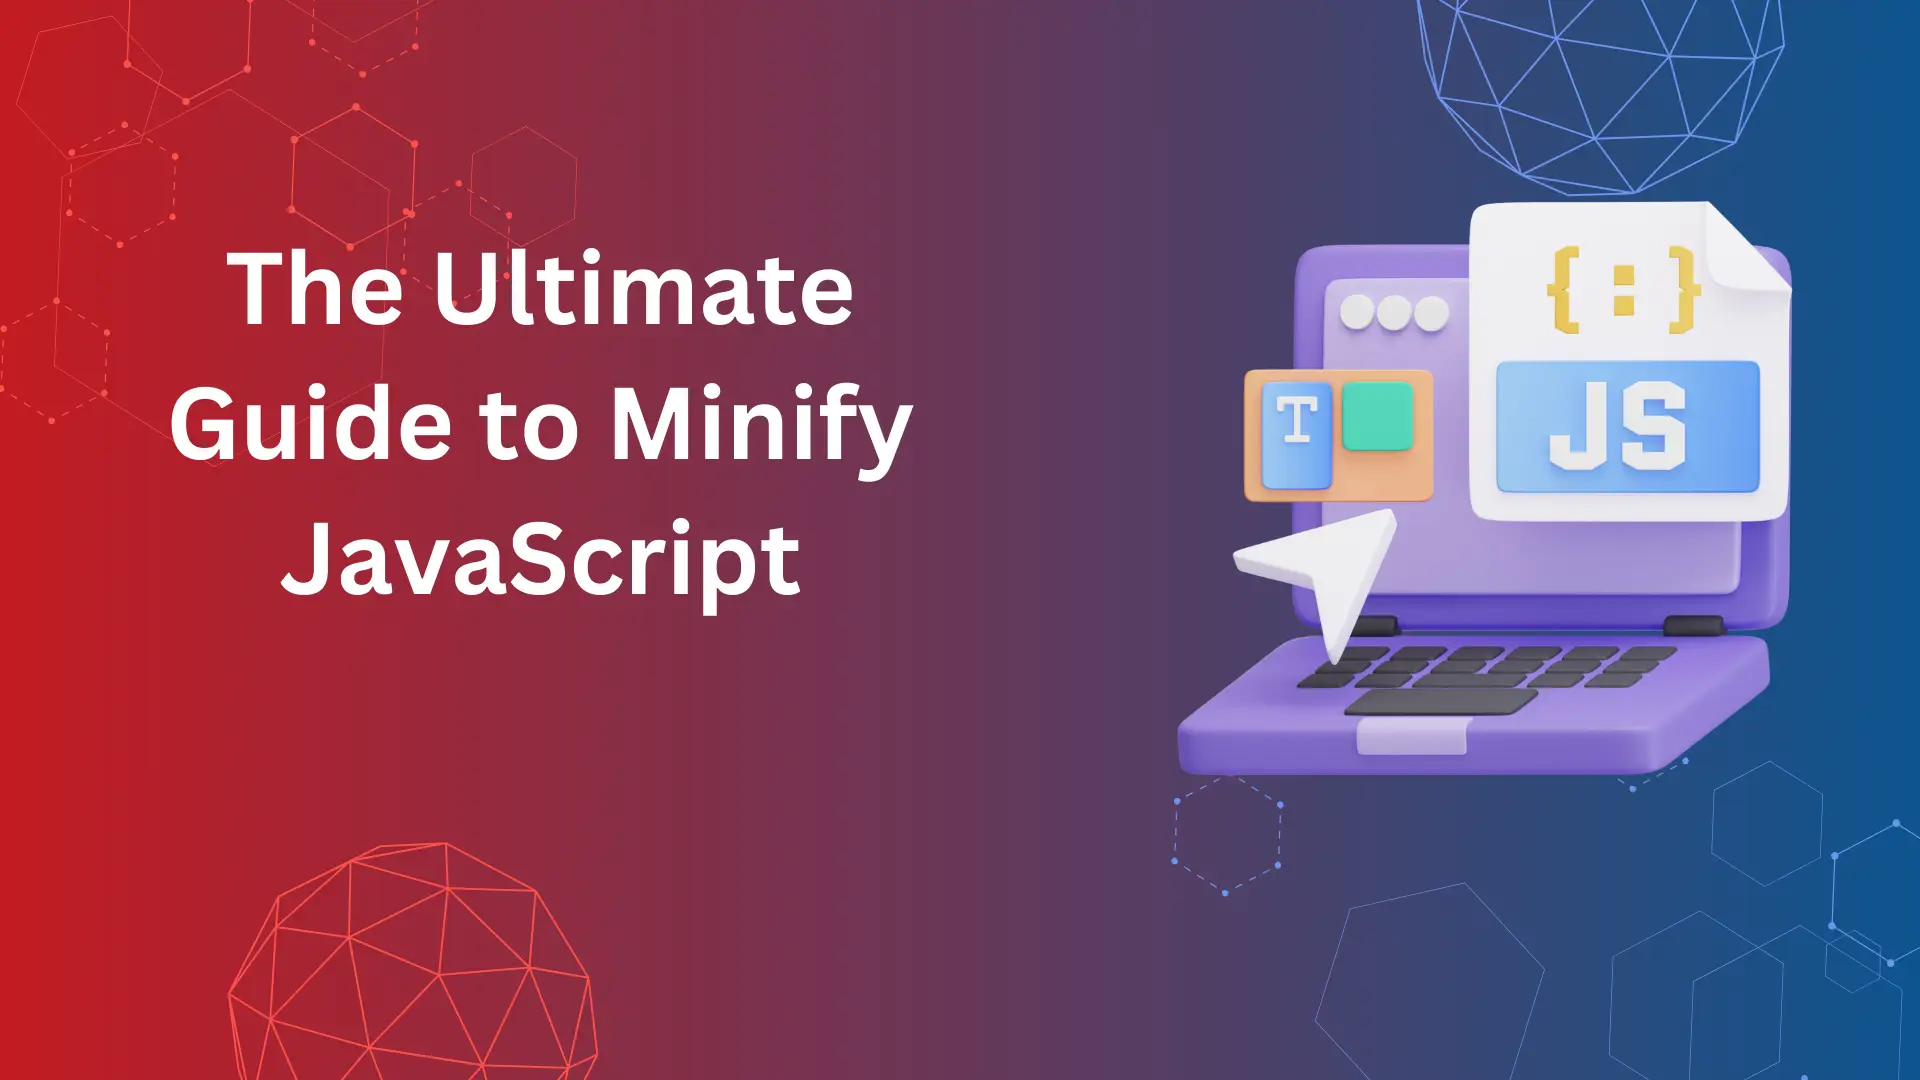 The ultimate guide to Minify JavaScript